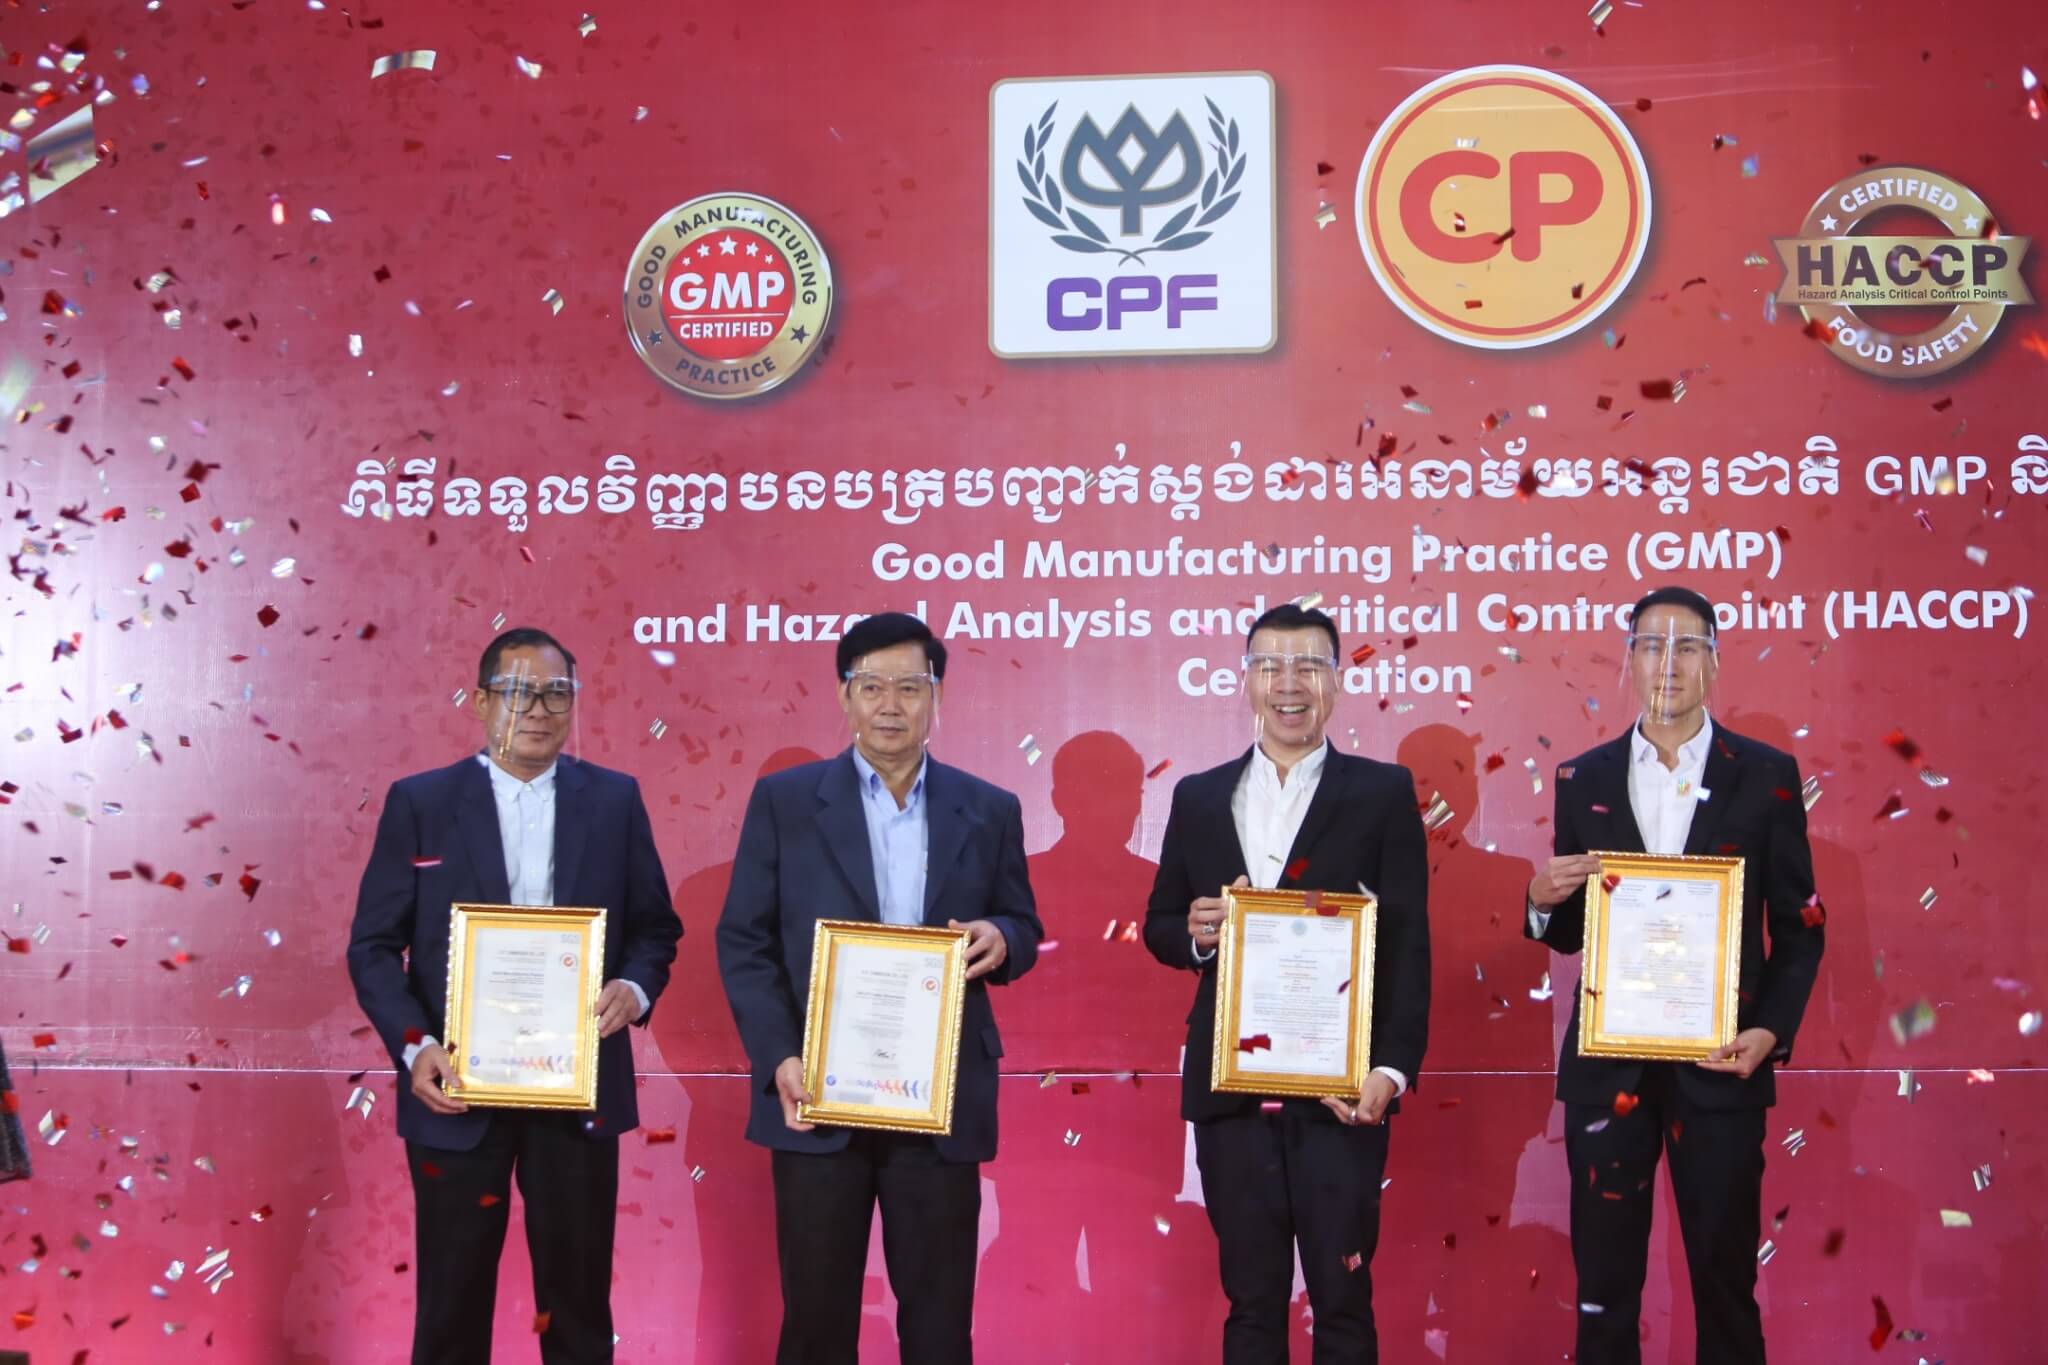 C.P. Cambodia achieved GMP and HACCP certification, ensuring food safety and quality align with global standard